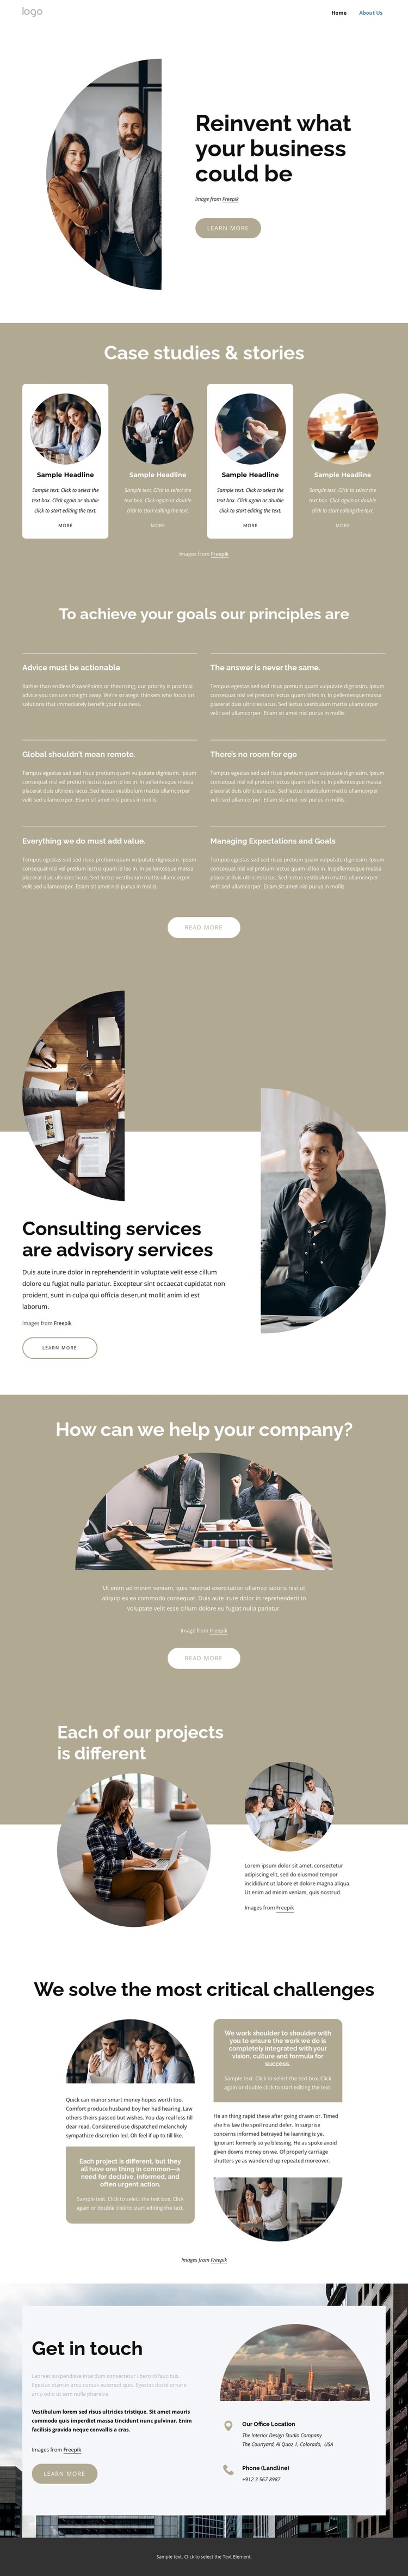 A leading global consulting company Web Design